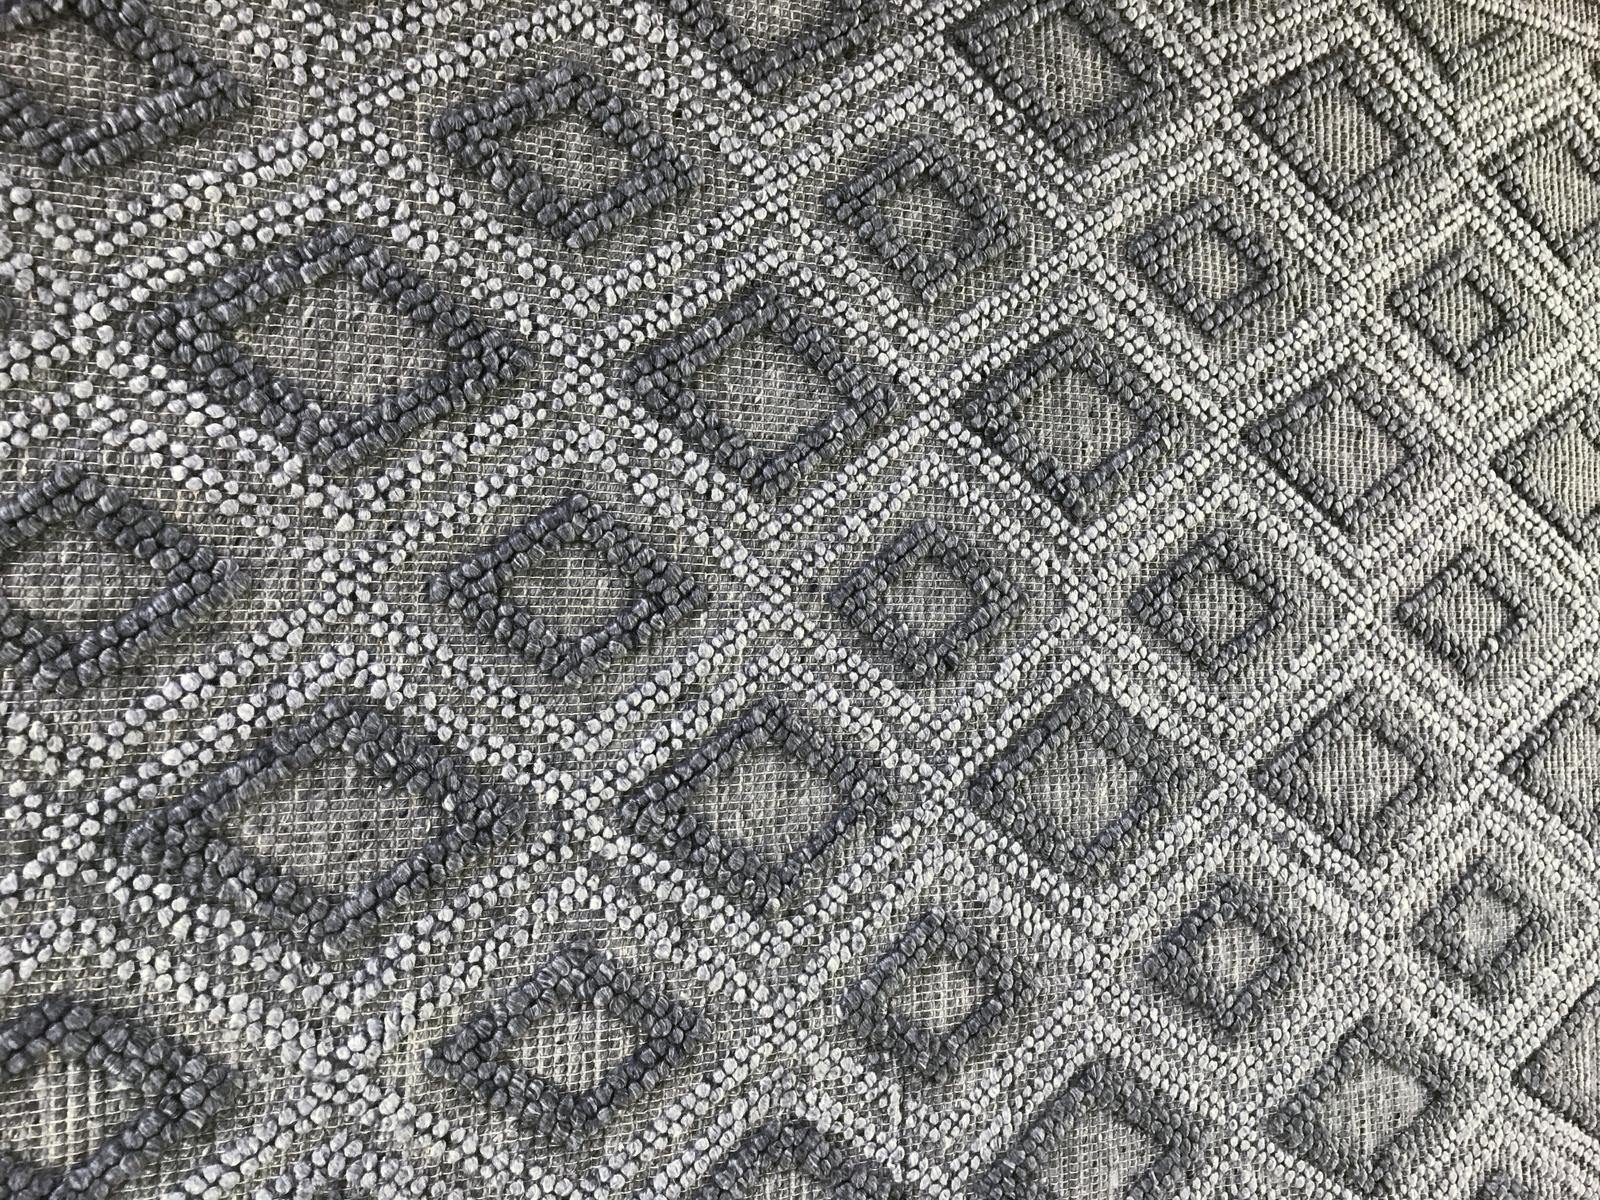 Design meets texture in this dynamic contemporary Indian braided rug with diamond pattern. The versatile gray-scale tones can provide companion piece for a similar mono-chromatic scheme or a neutral base to make colors pop. Braiding adds a